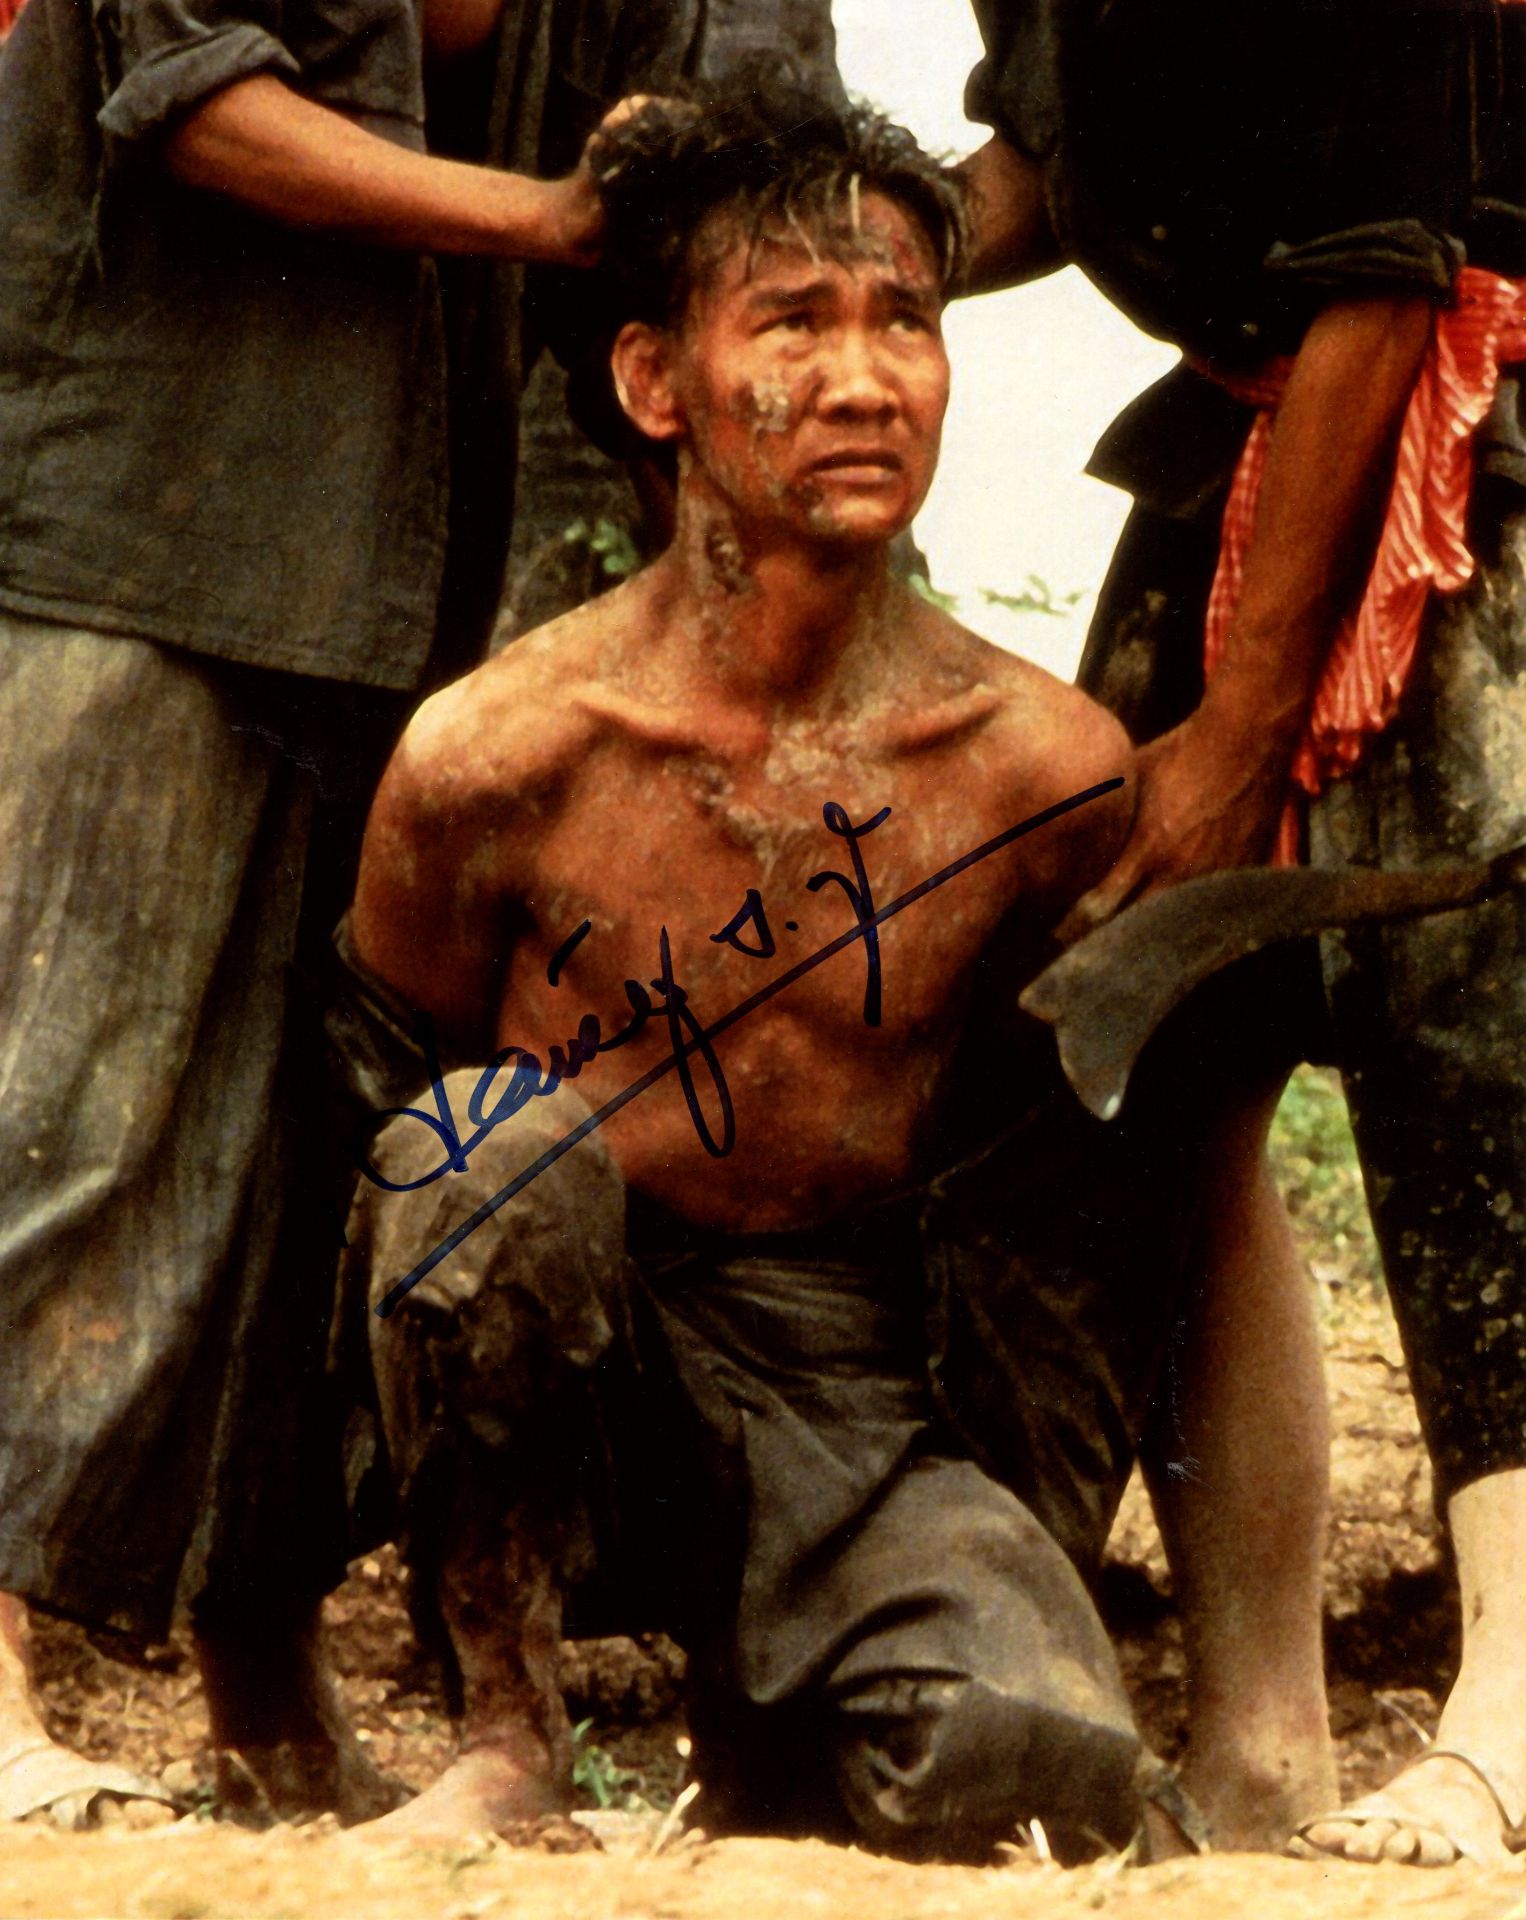 NGOR HAING S.: (1940-1996) Cambodian-American physician and actor, Academy Award winner.